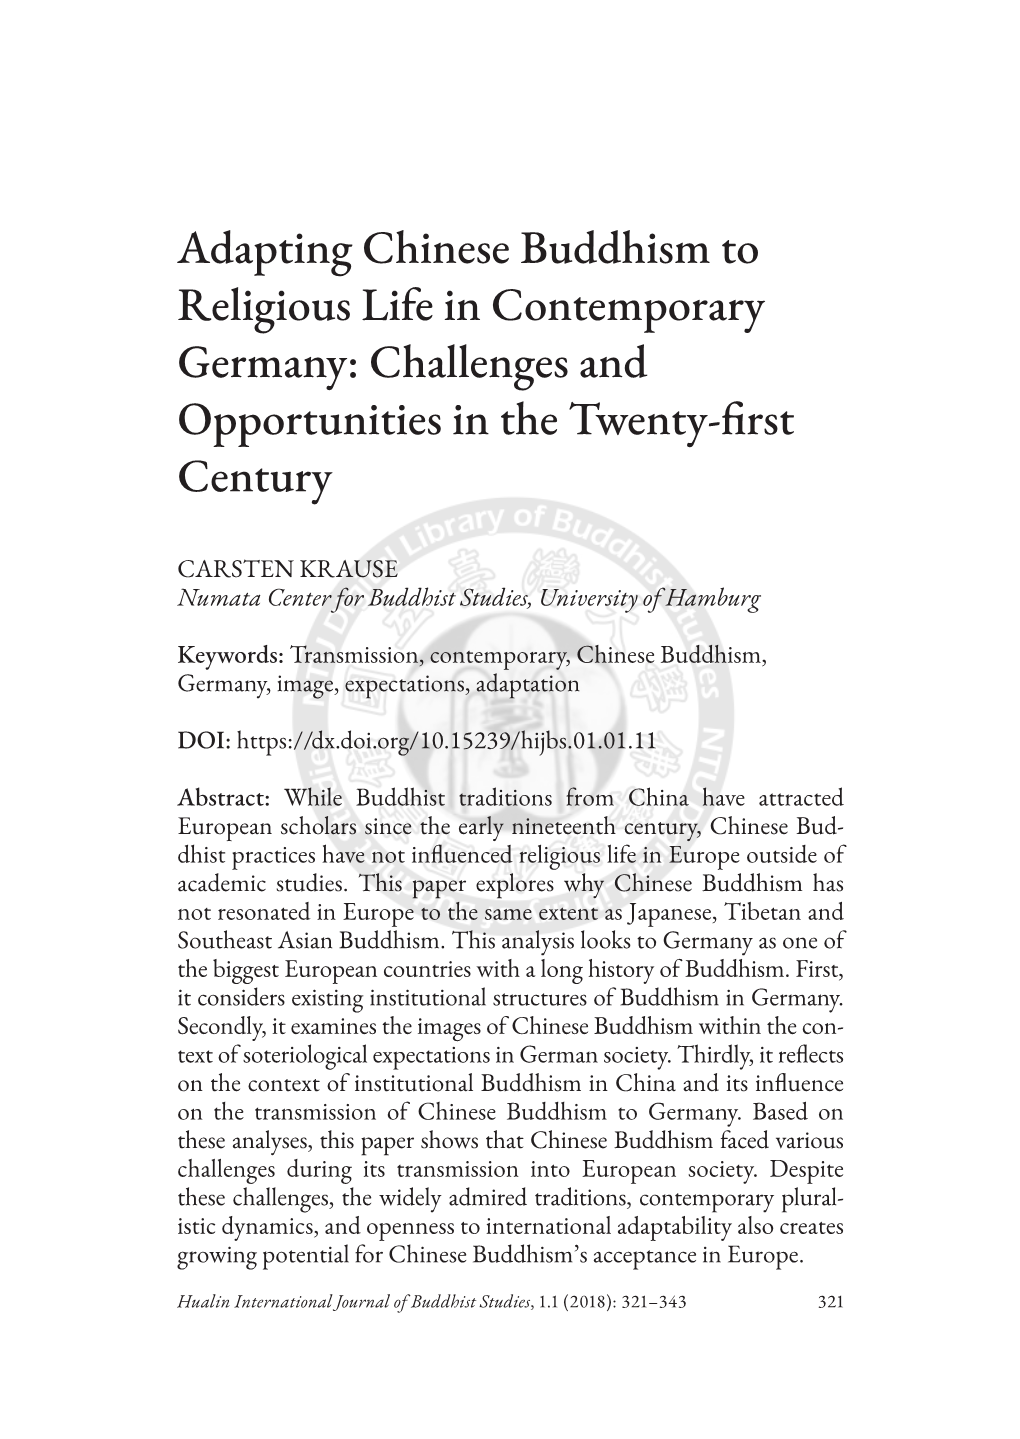 Adapting Chinese Buddhism to Religious Life in Contemporary Germany: Challenges and Opportunities in the Twenty-First Century